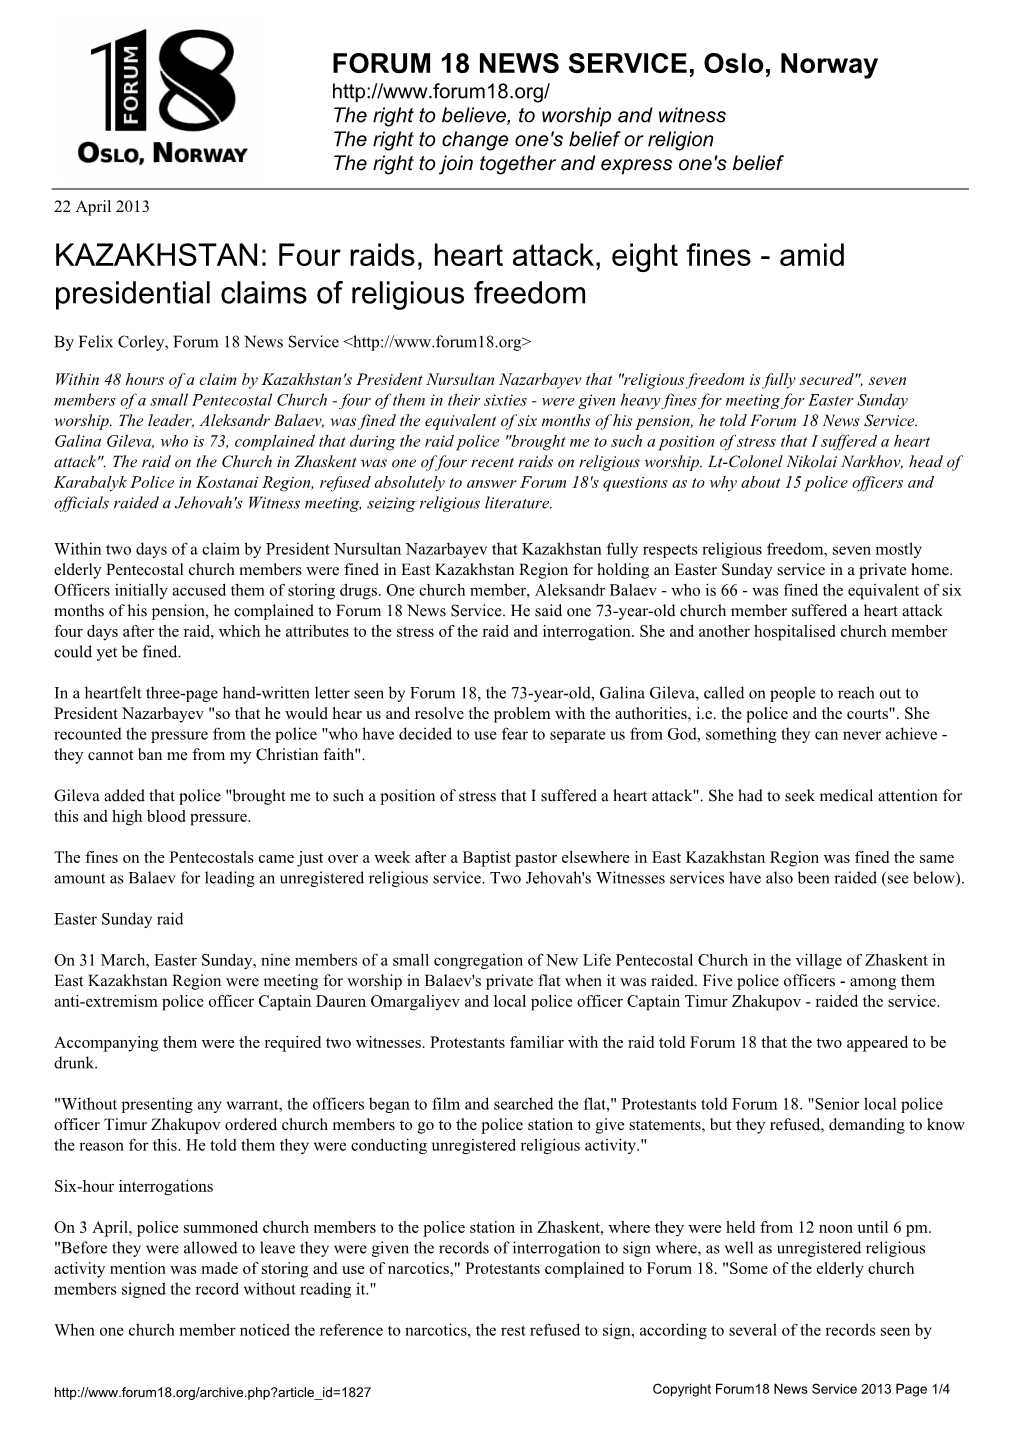 KAZAKHSTAN: Four Raids, Heart Attack, Eight Fines - Amid Presidential Claims of Religious Freedom